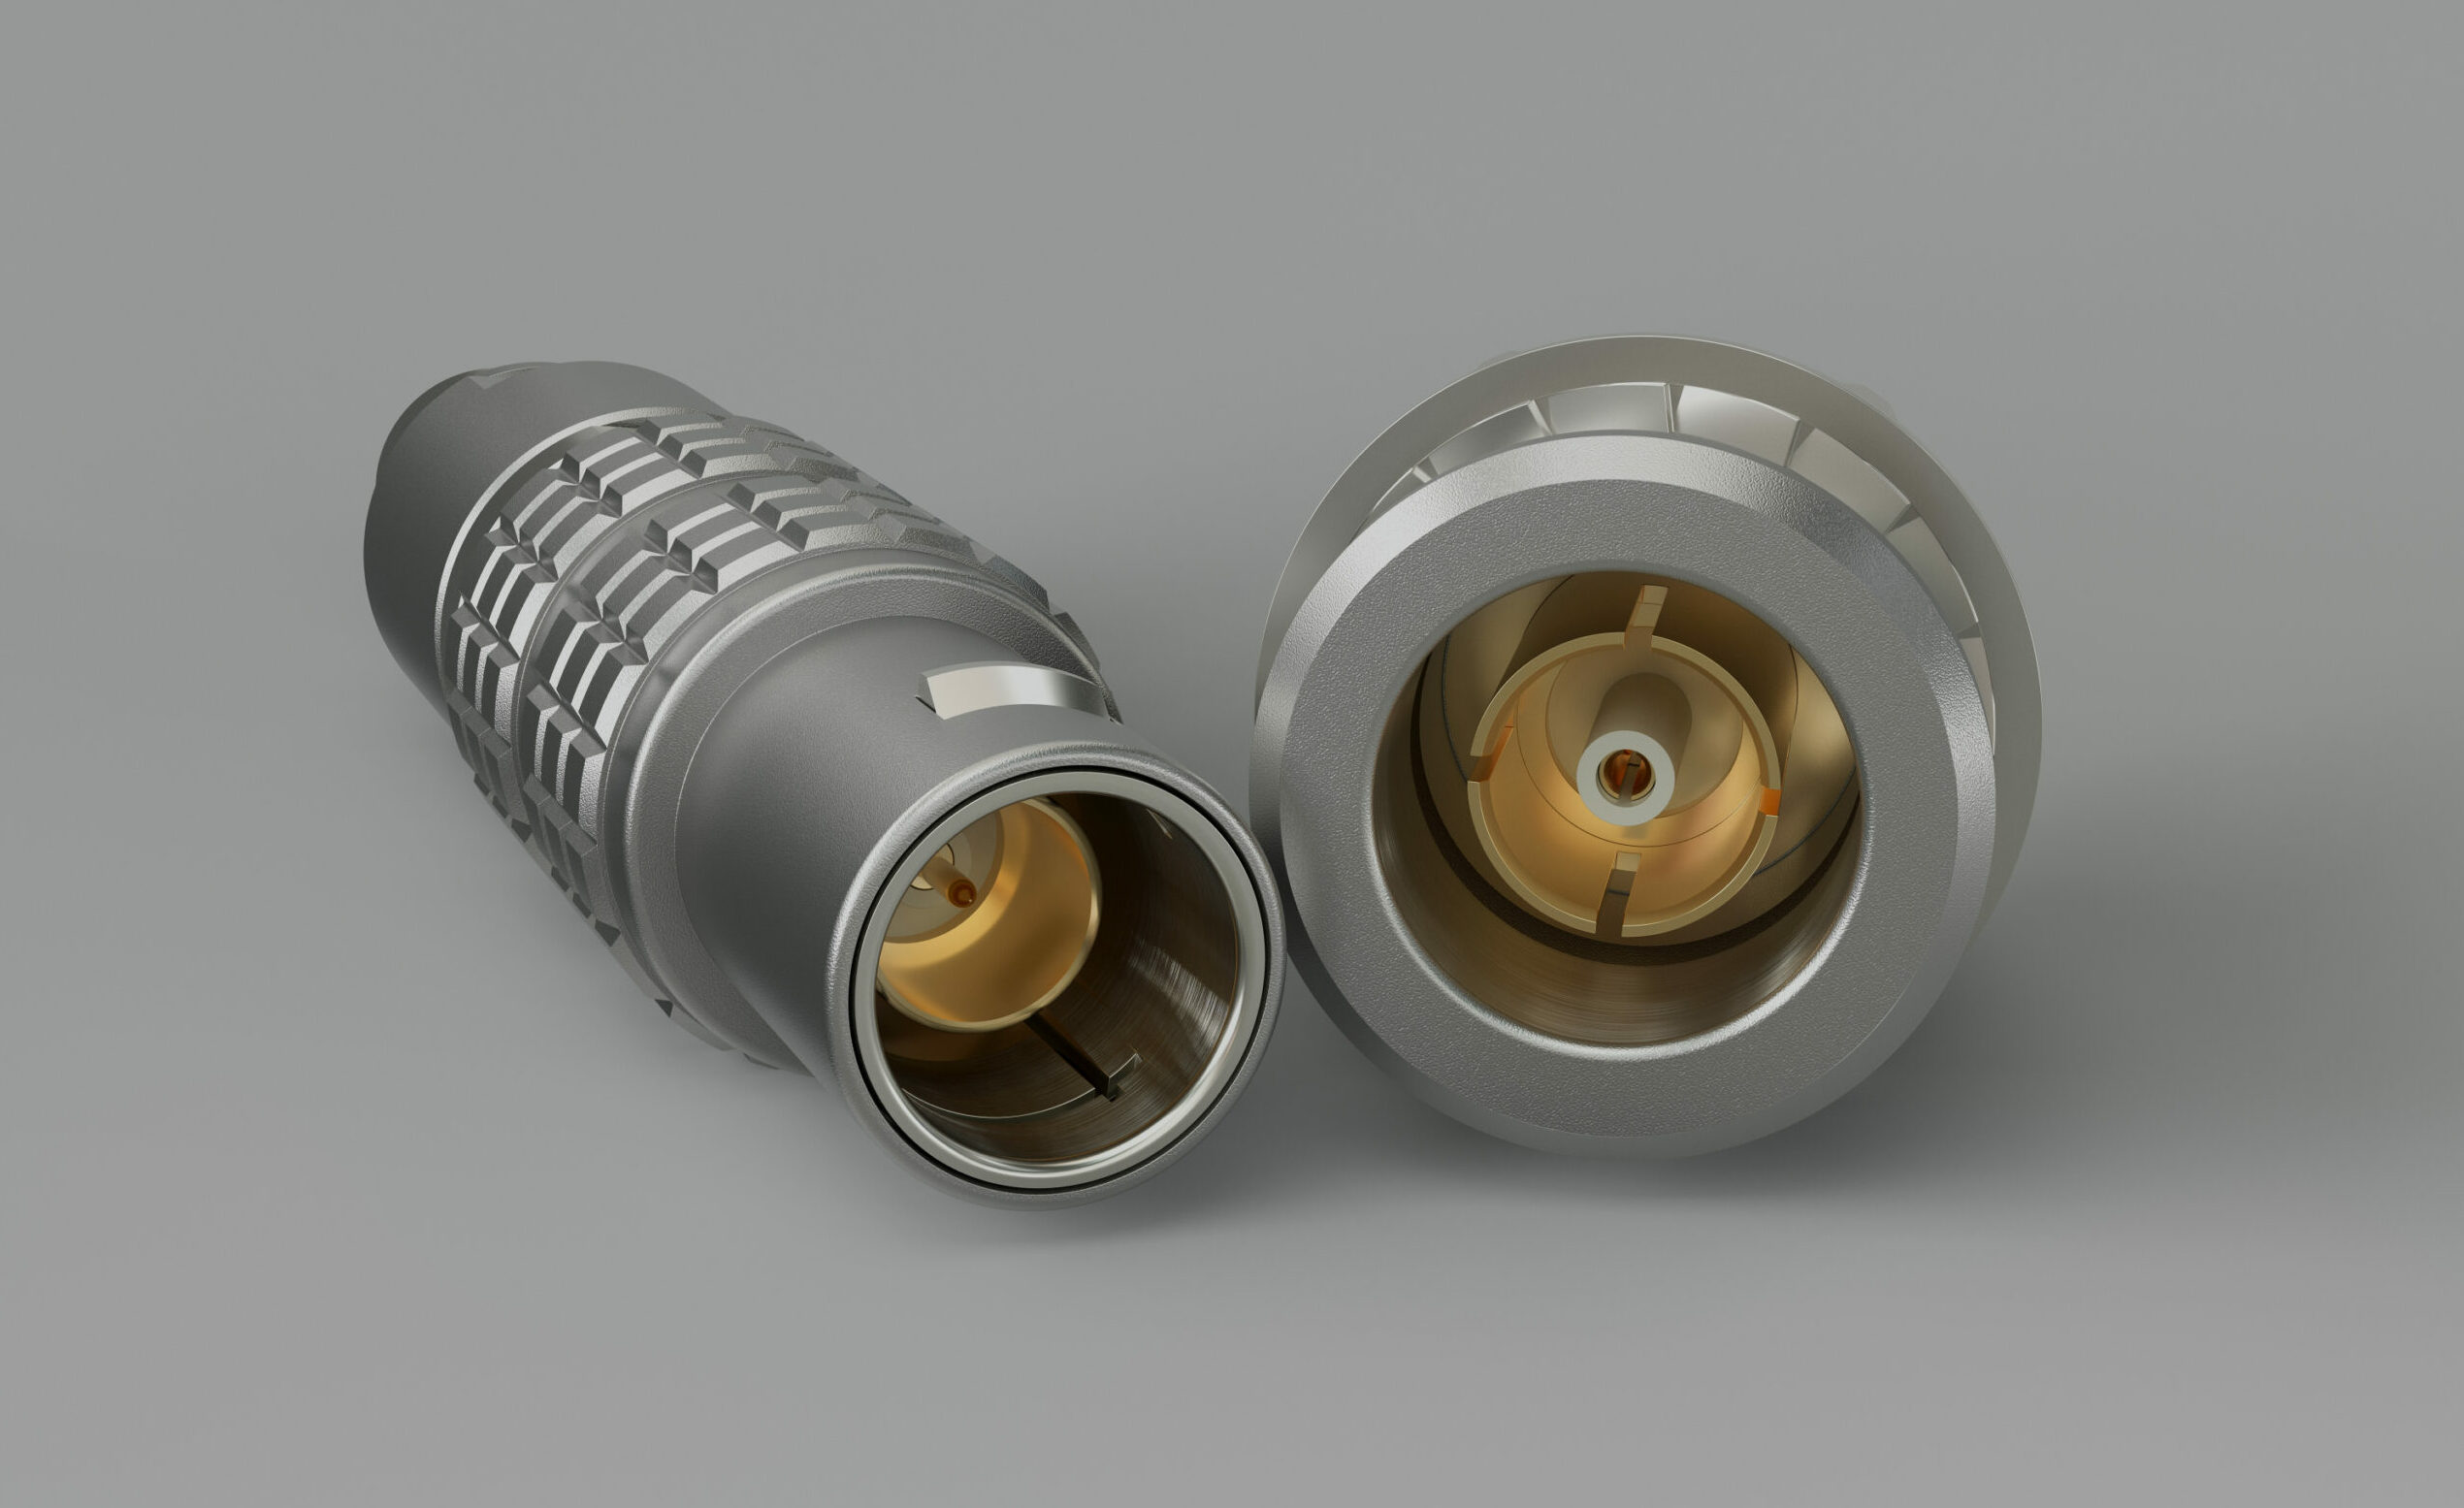 Discover LEMO’s new 12G-SDI 4K Ultra High Definition transmission push-pull connectors